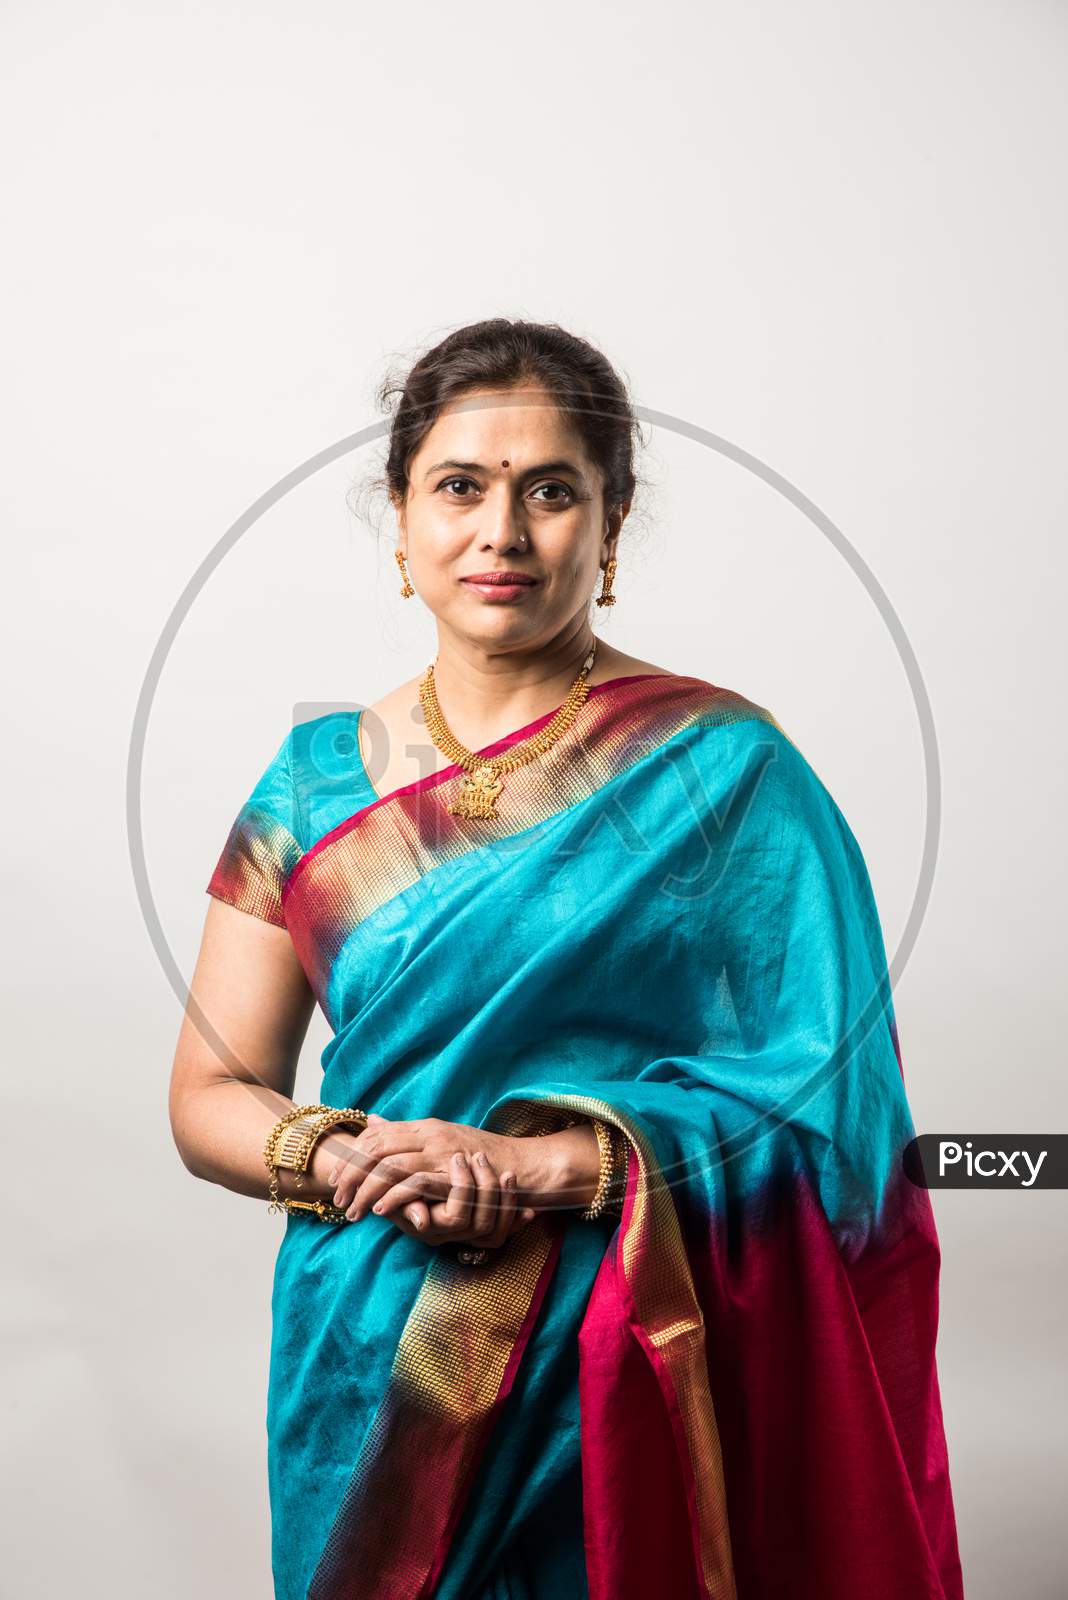 Portrait Of Mid Age Or Old Indian Asian Woman Or Lady In Traditional Saree Against White Background